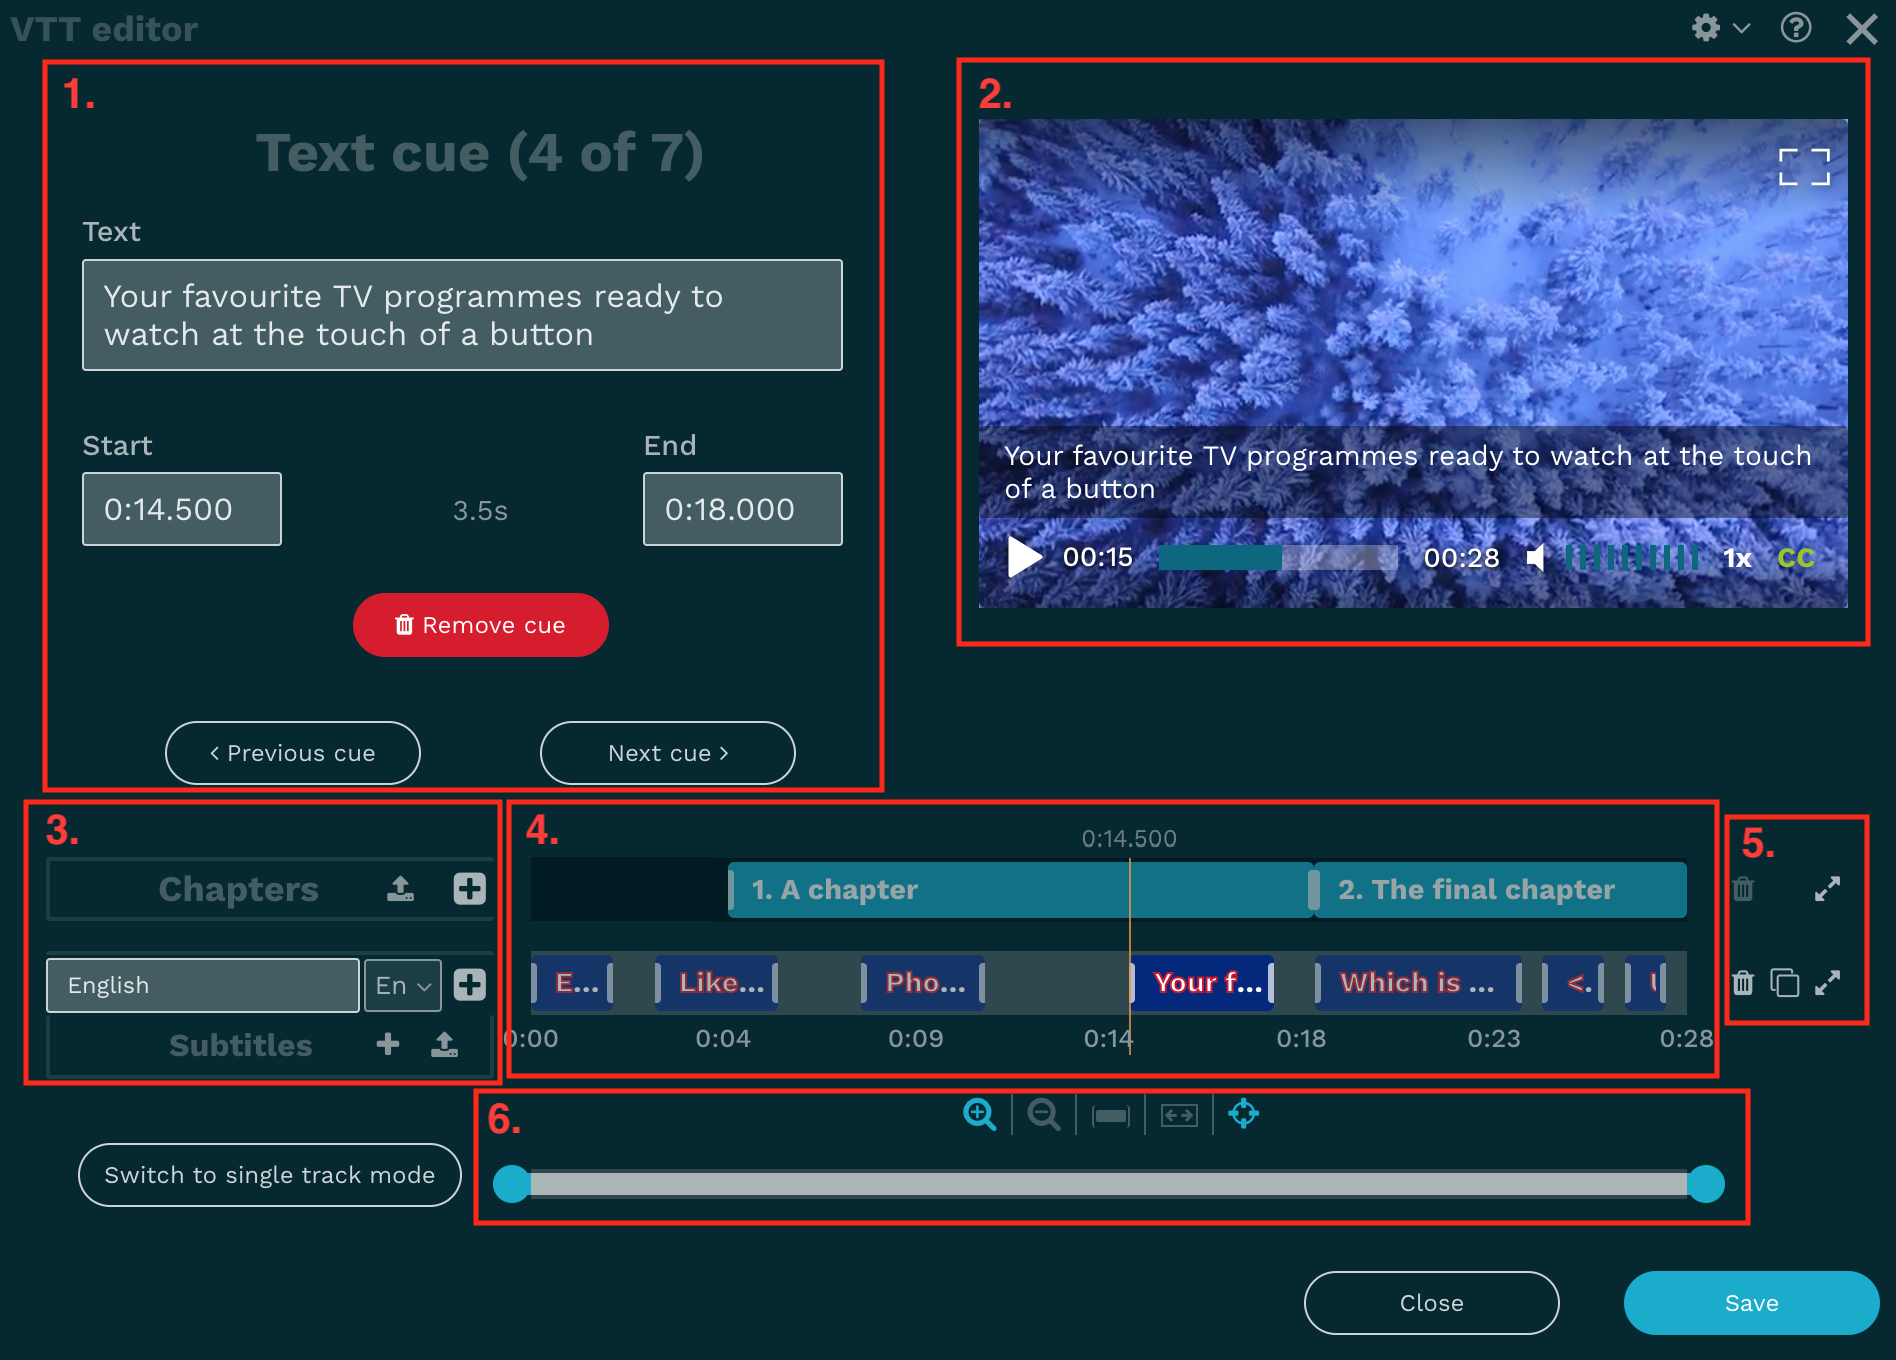 Live clipping editor